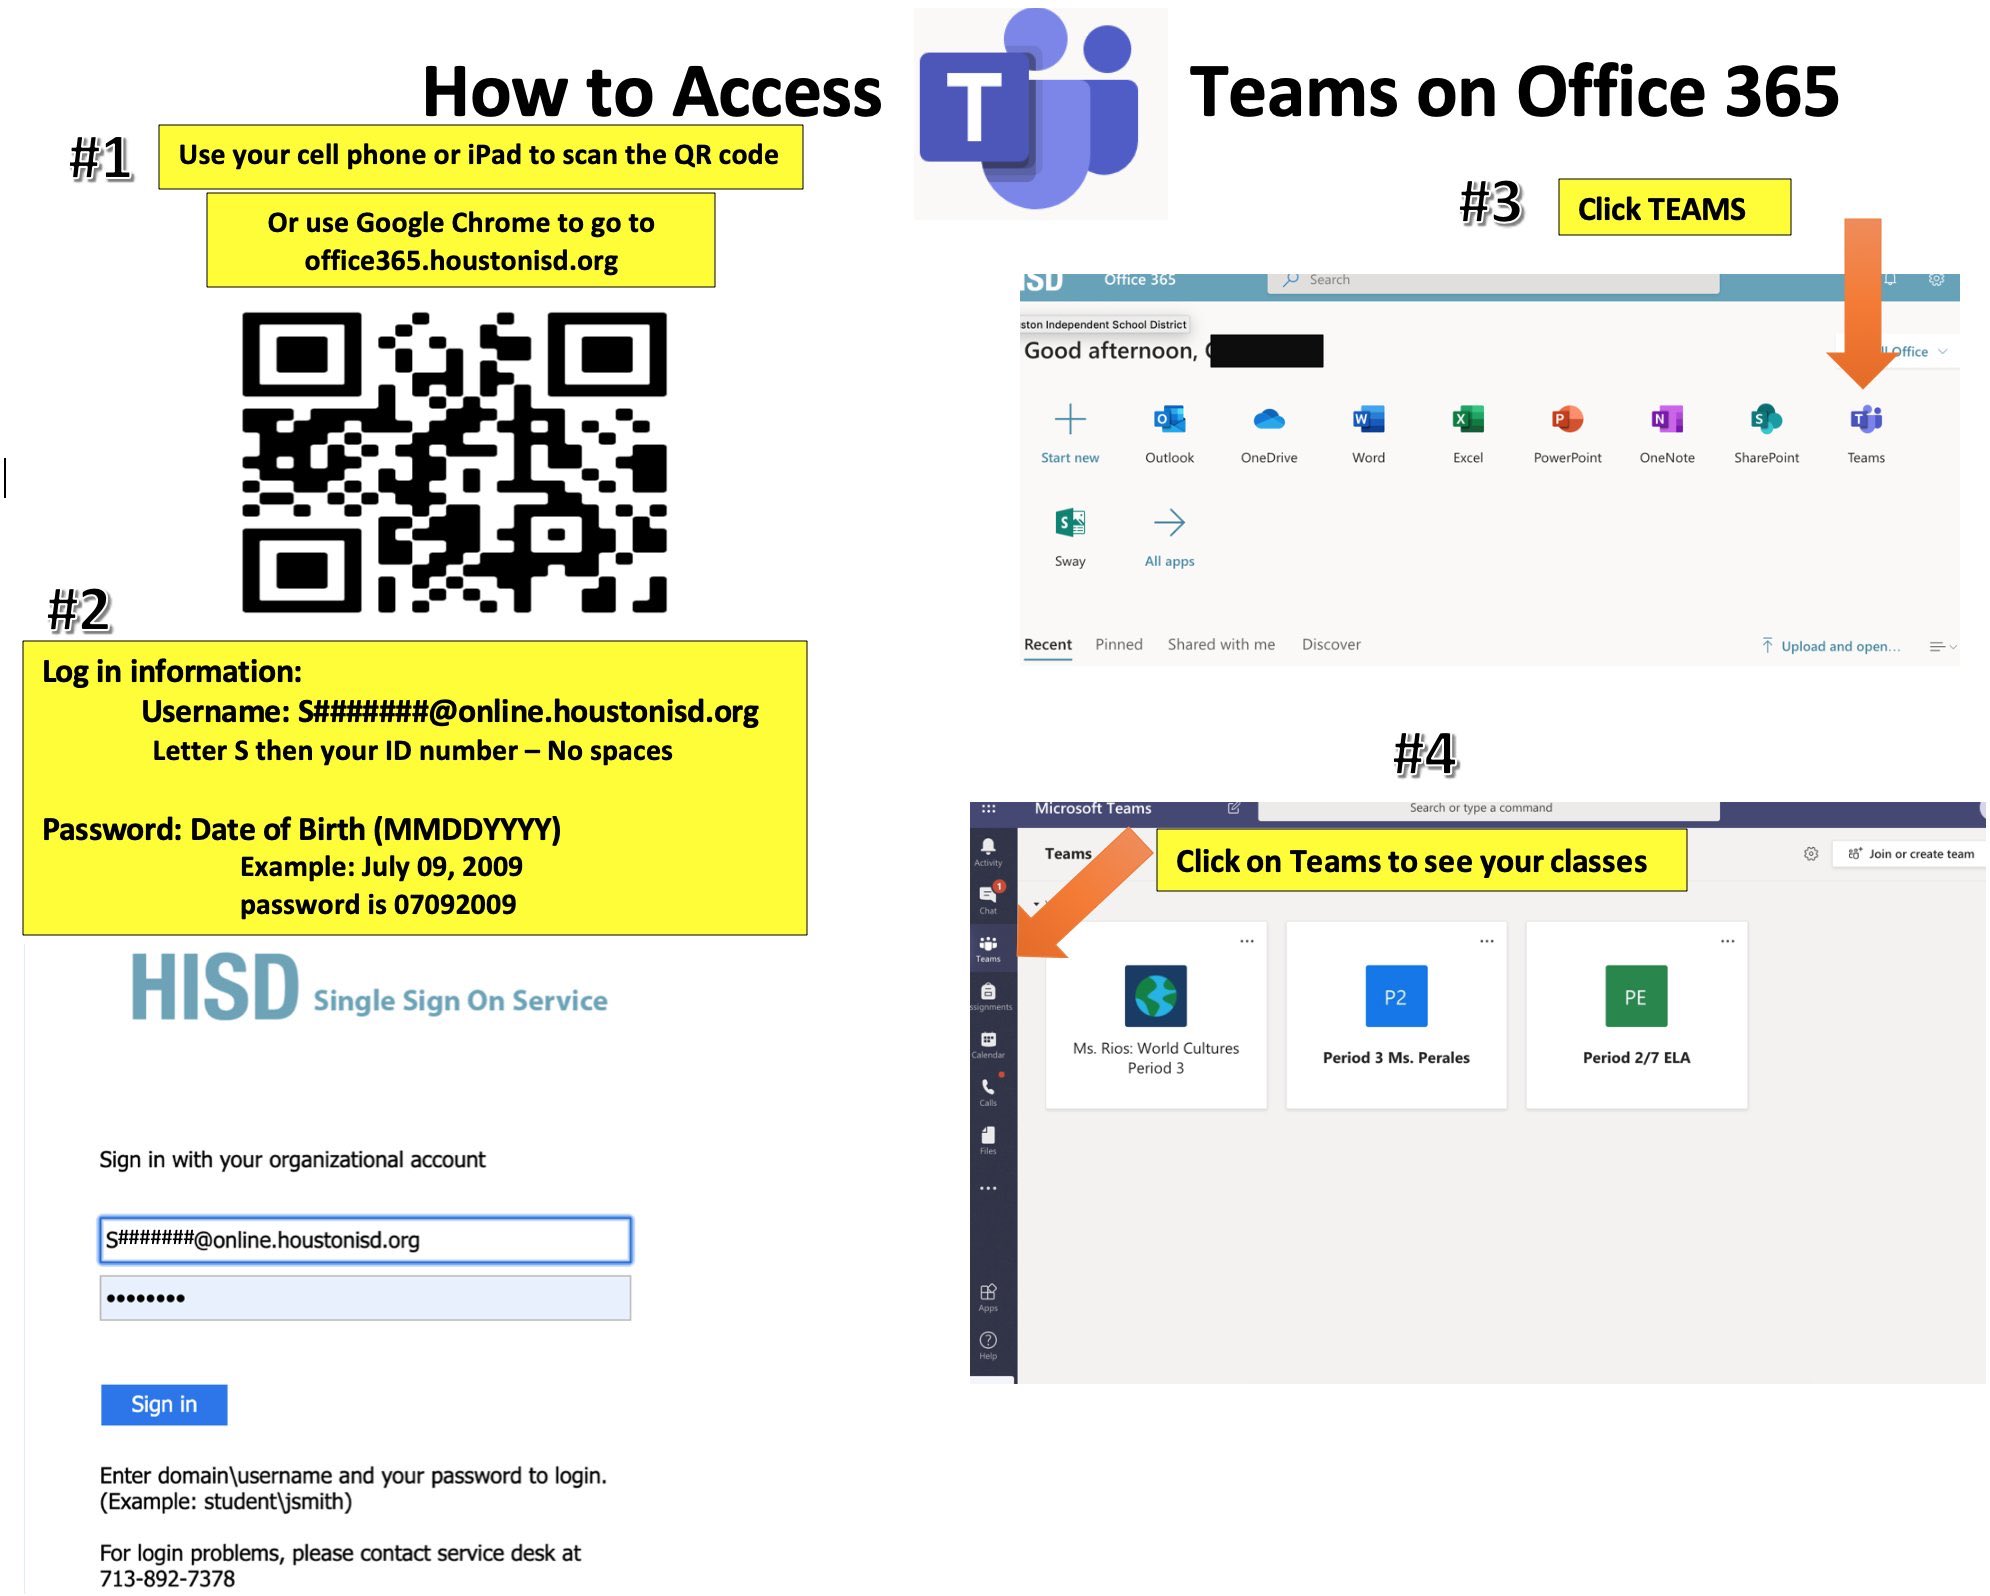 Hisd Burbank Ms Ar Twitter Calling All Burbankeagles Begin Your Online Learning Tomorrow March 31st Go To Https T Co 6ewb15v3nj You Can Also Download The Microsoft Teams App Checkout These Photos For More